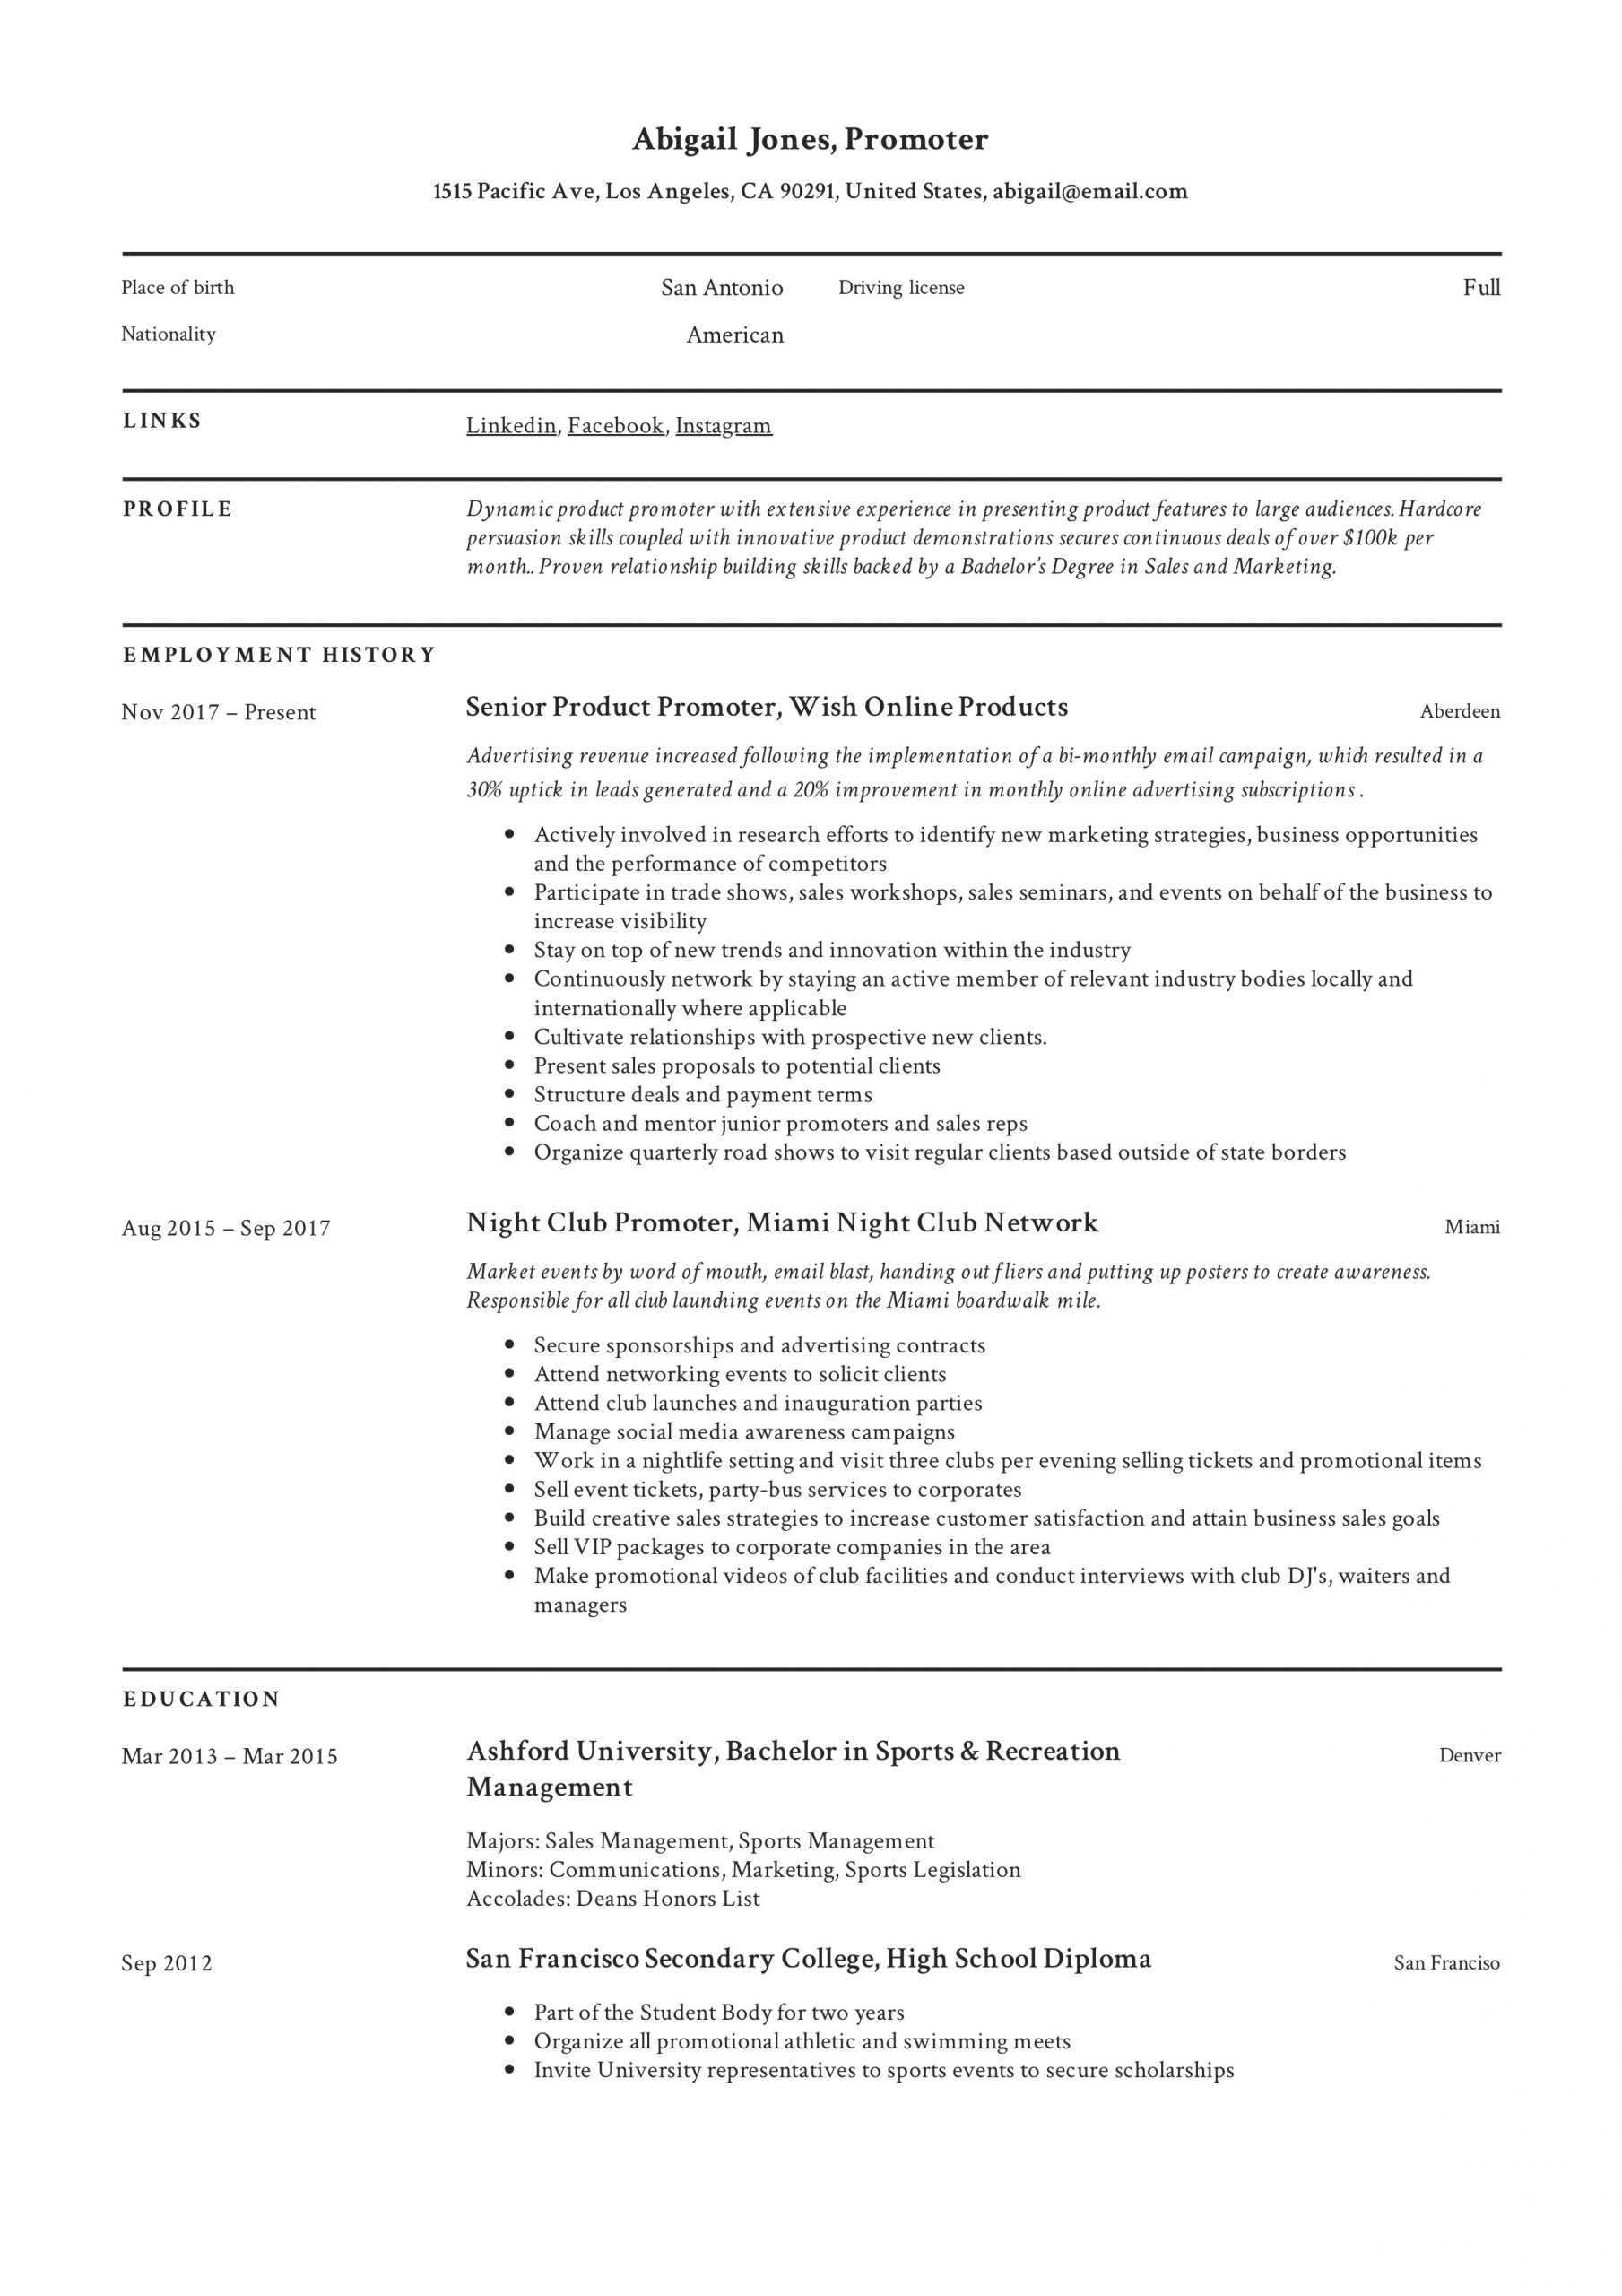 Sample Resume for Promotion within Same Company Promoter Resume Example & Writing Guide 12 Samples Pdf 2020